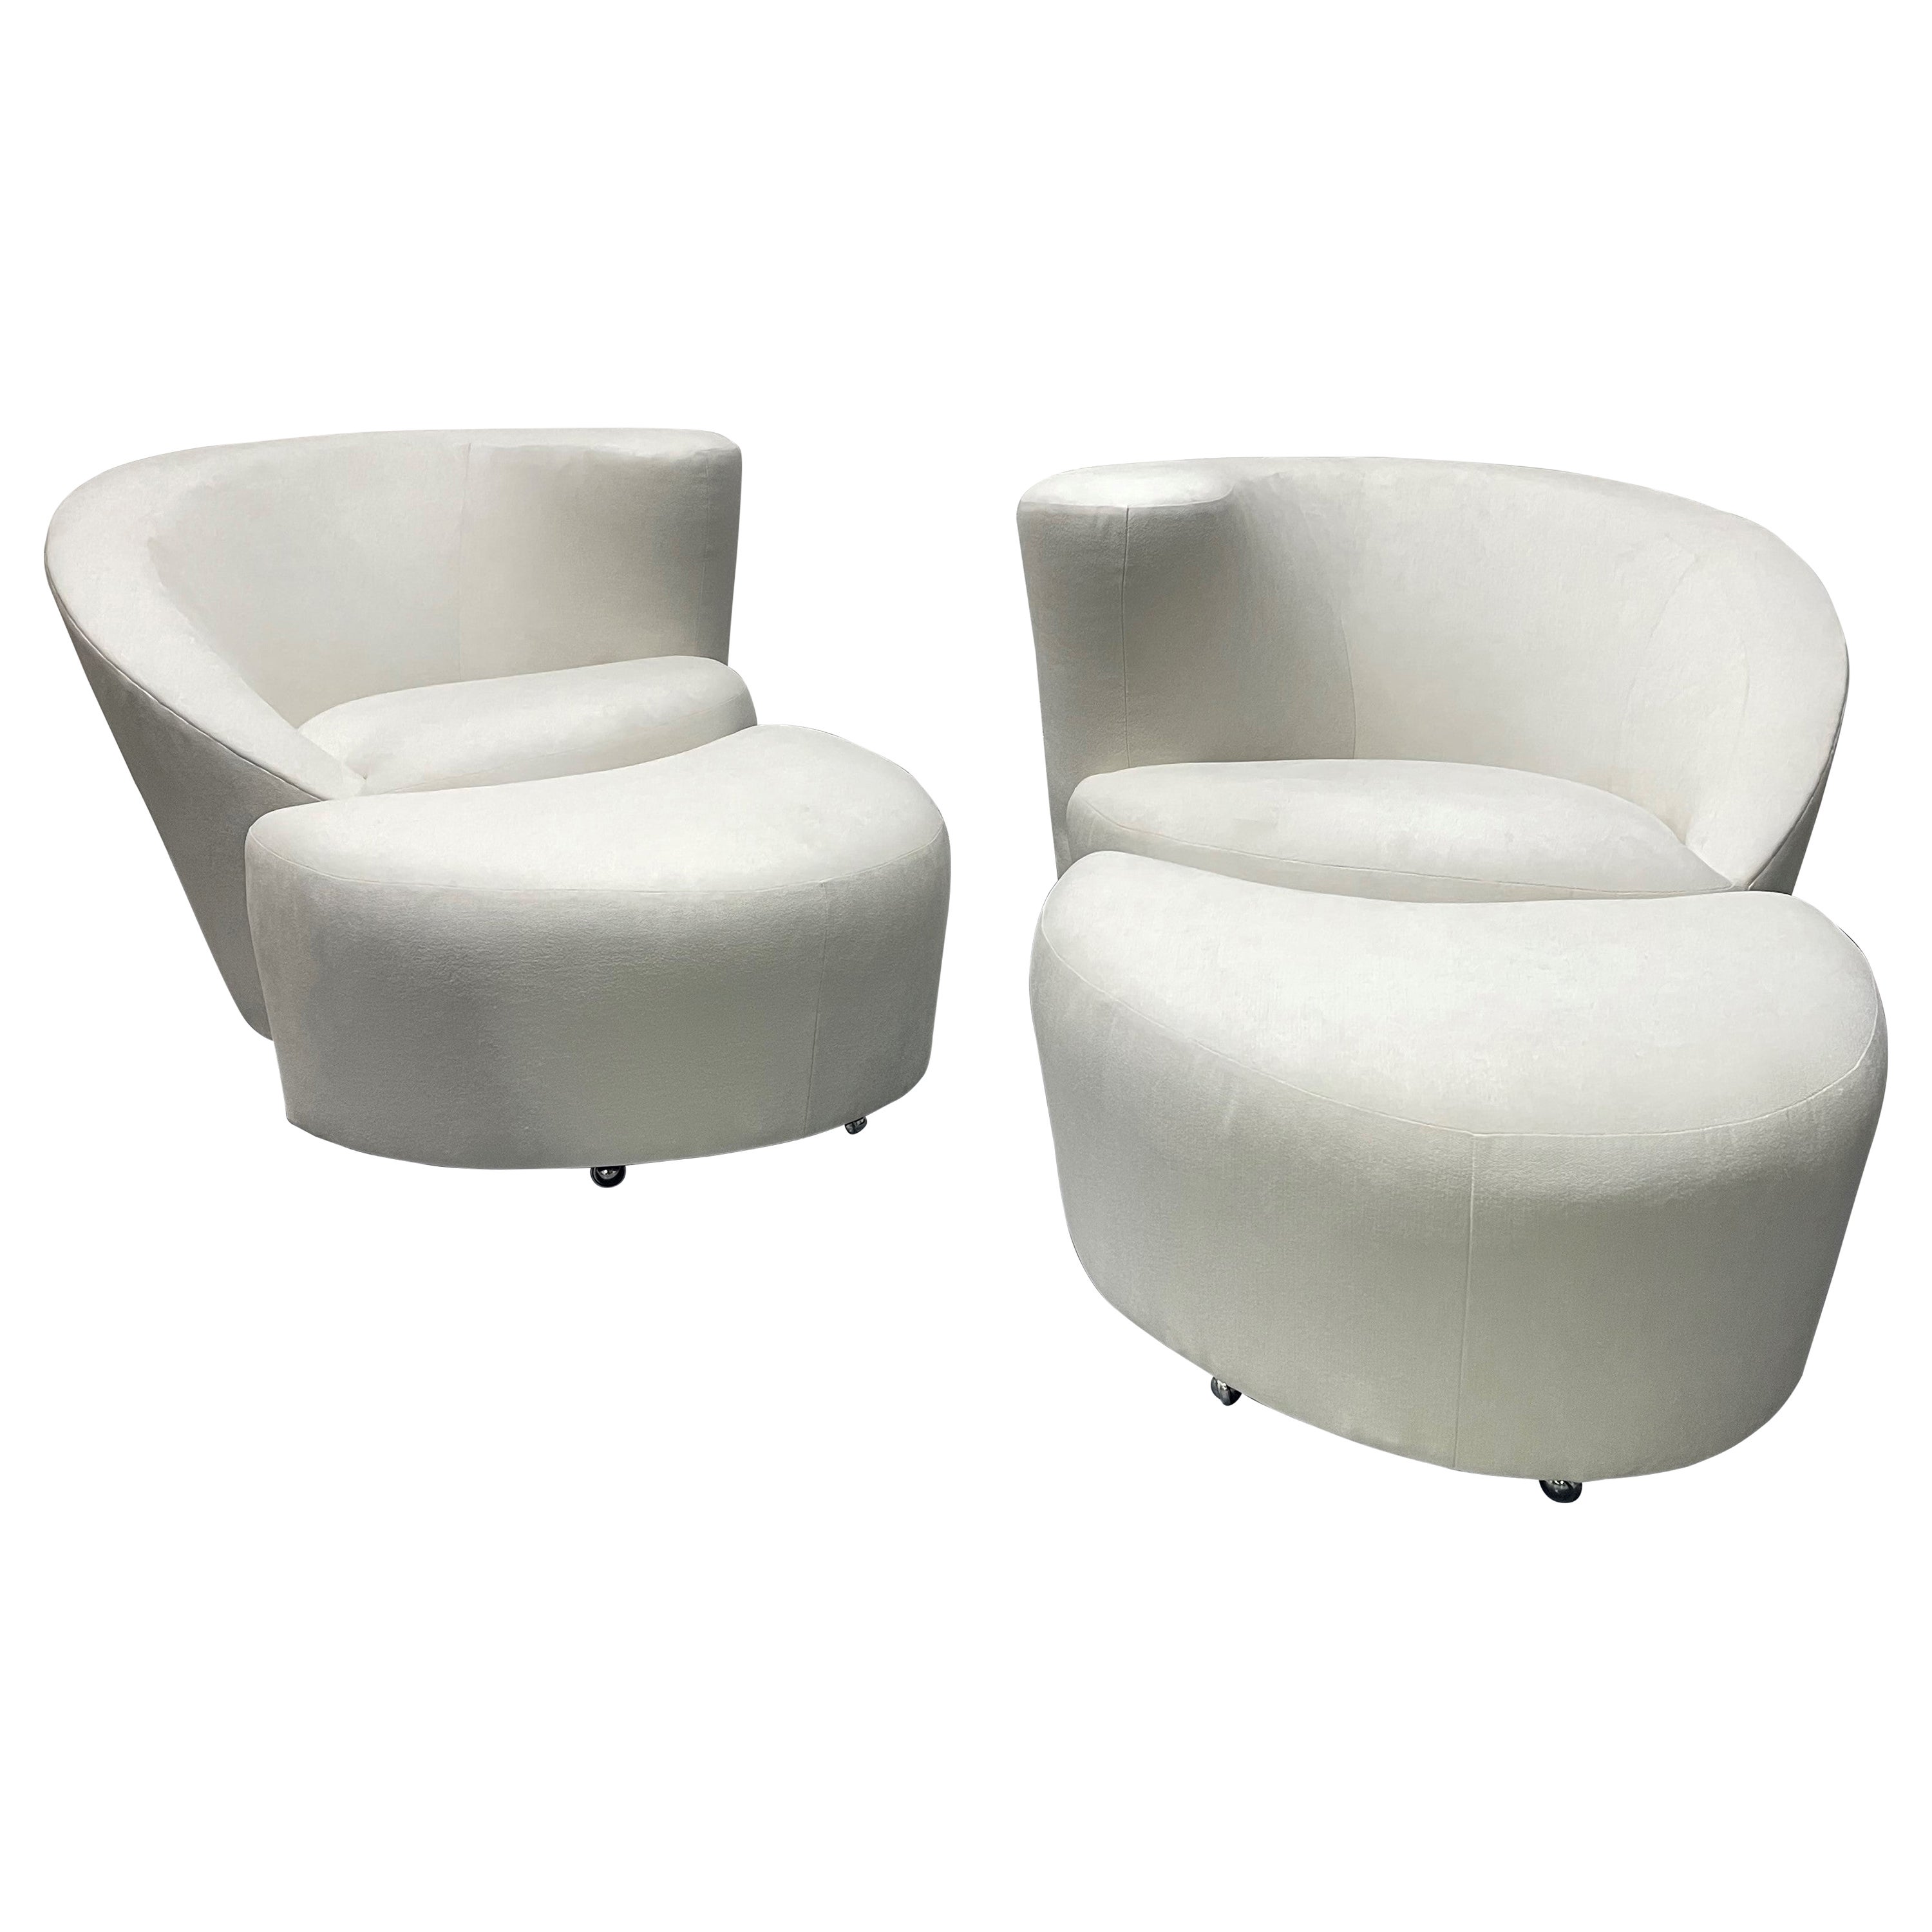  Nautilus Style Lounge Chairs with Matching Ottomans, Two Pairs